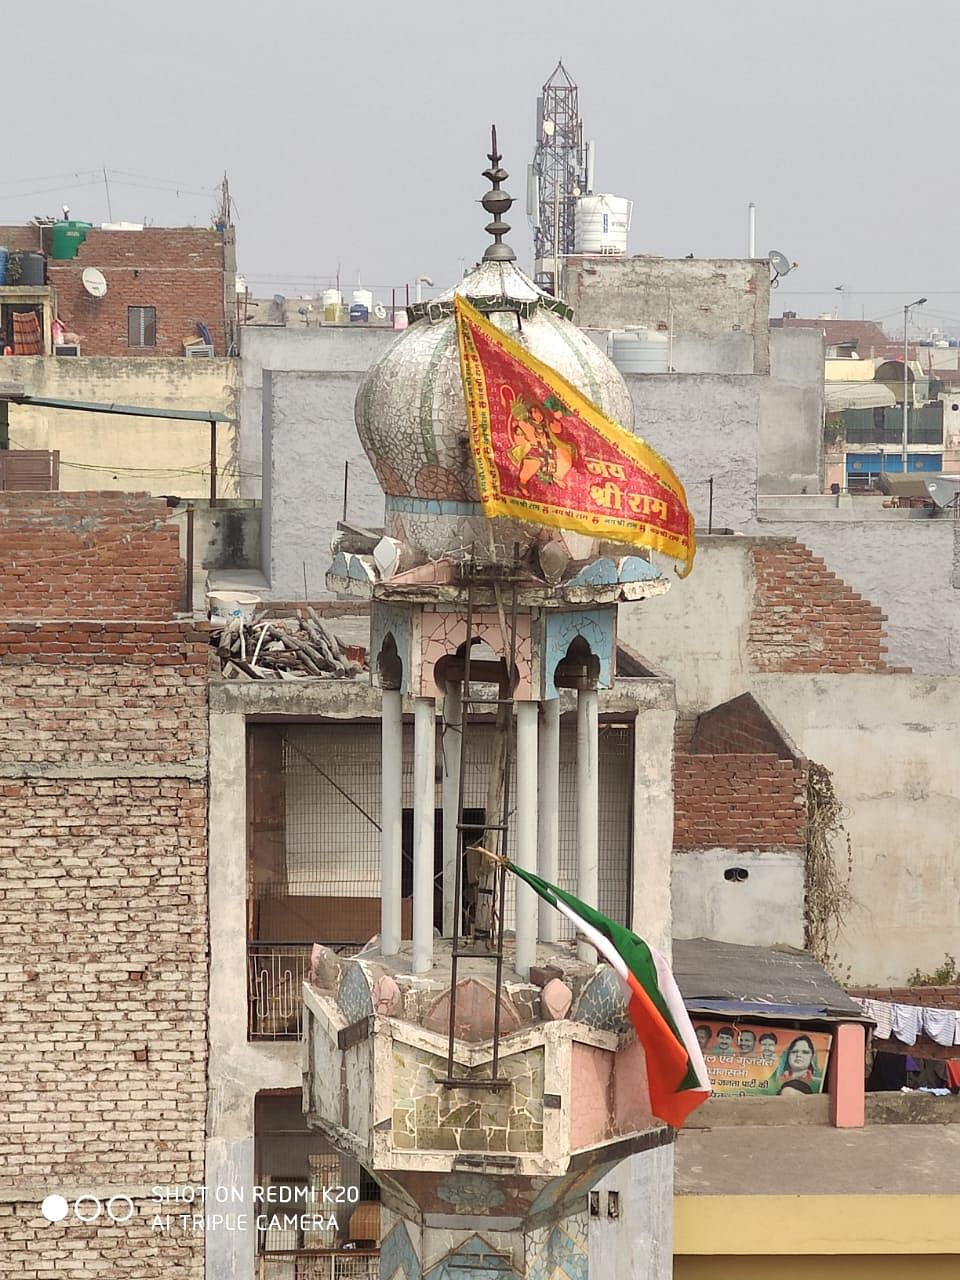 A clip posted by Ayub on 25 February shows some men attempting to place a saffron flag on the minaret of a mosque.